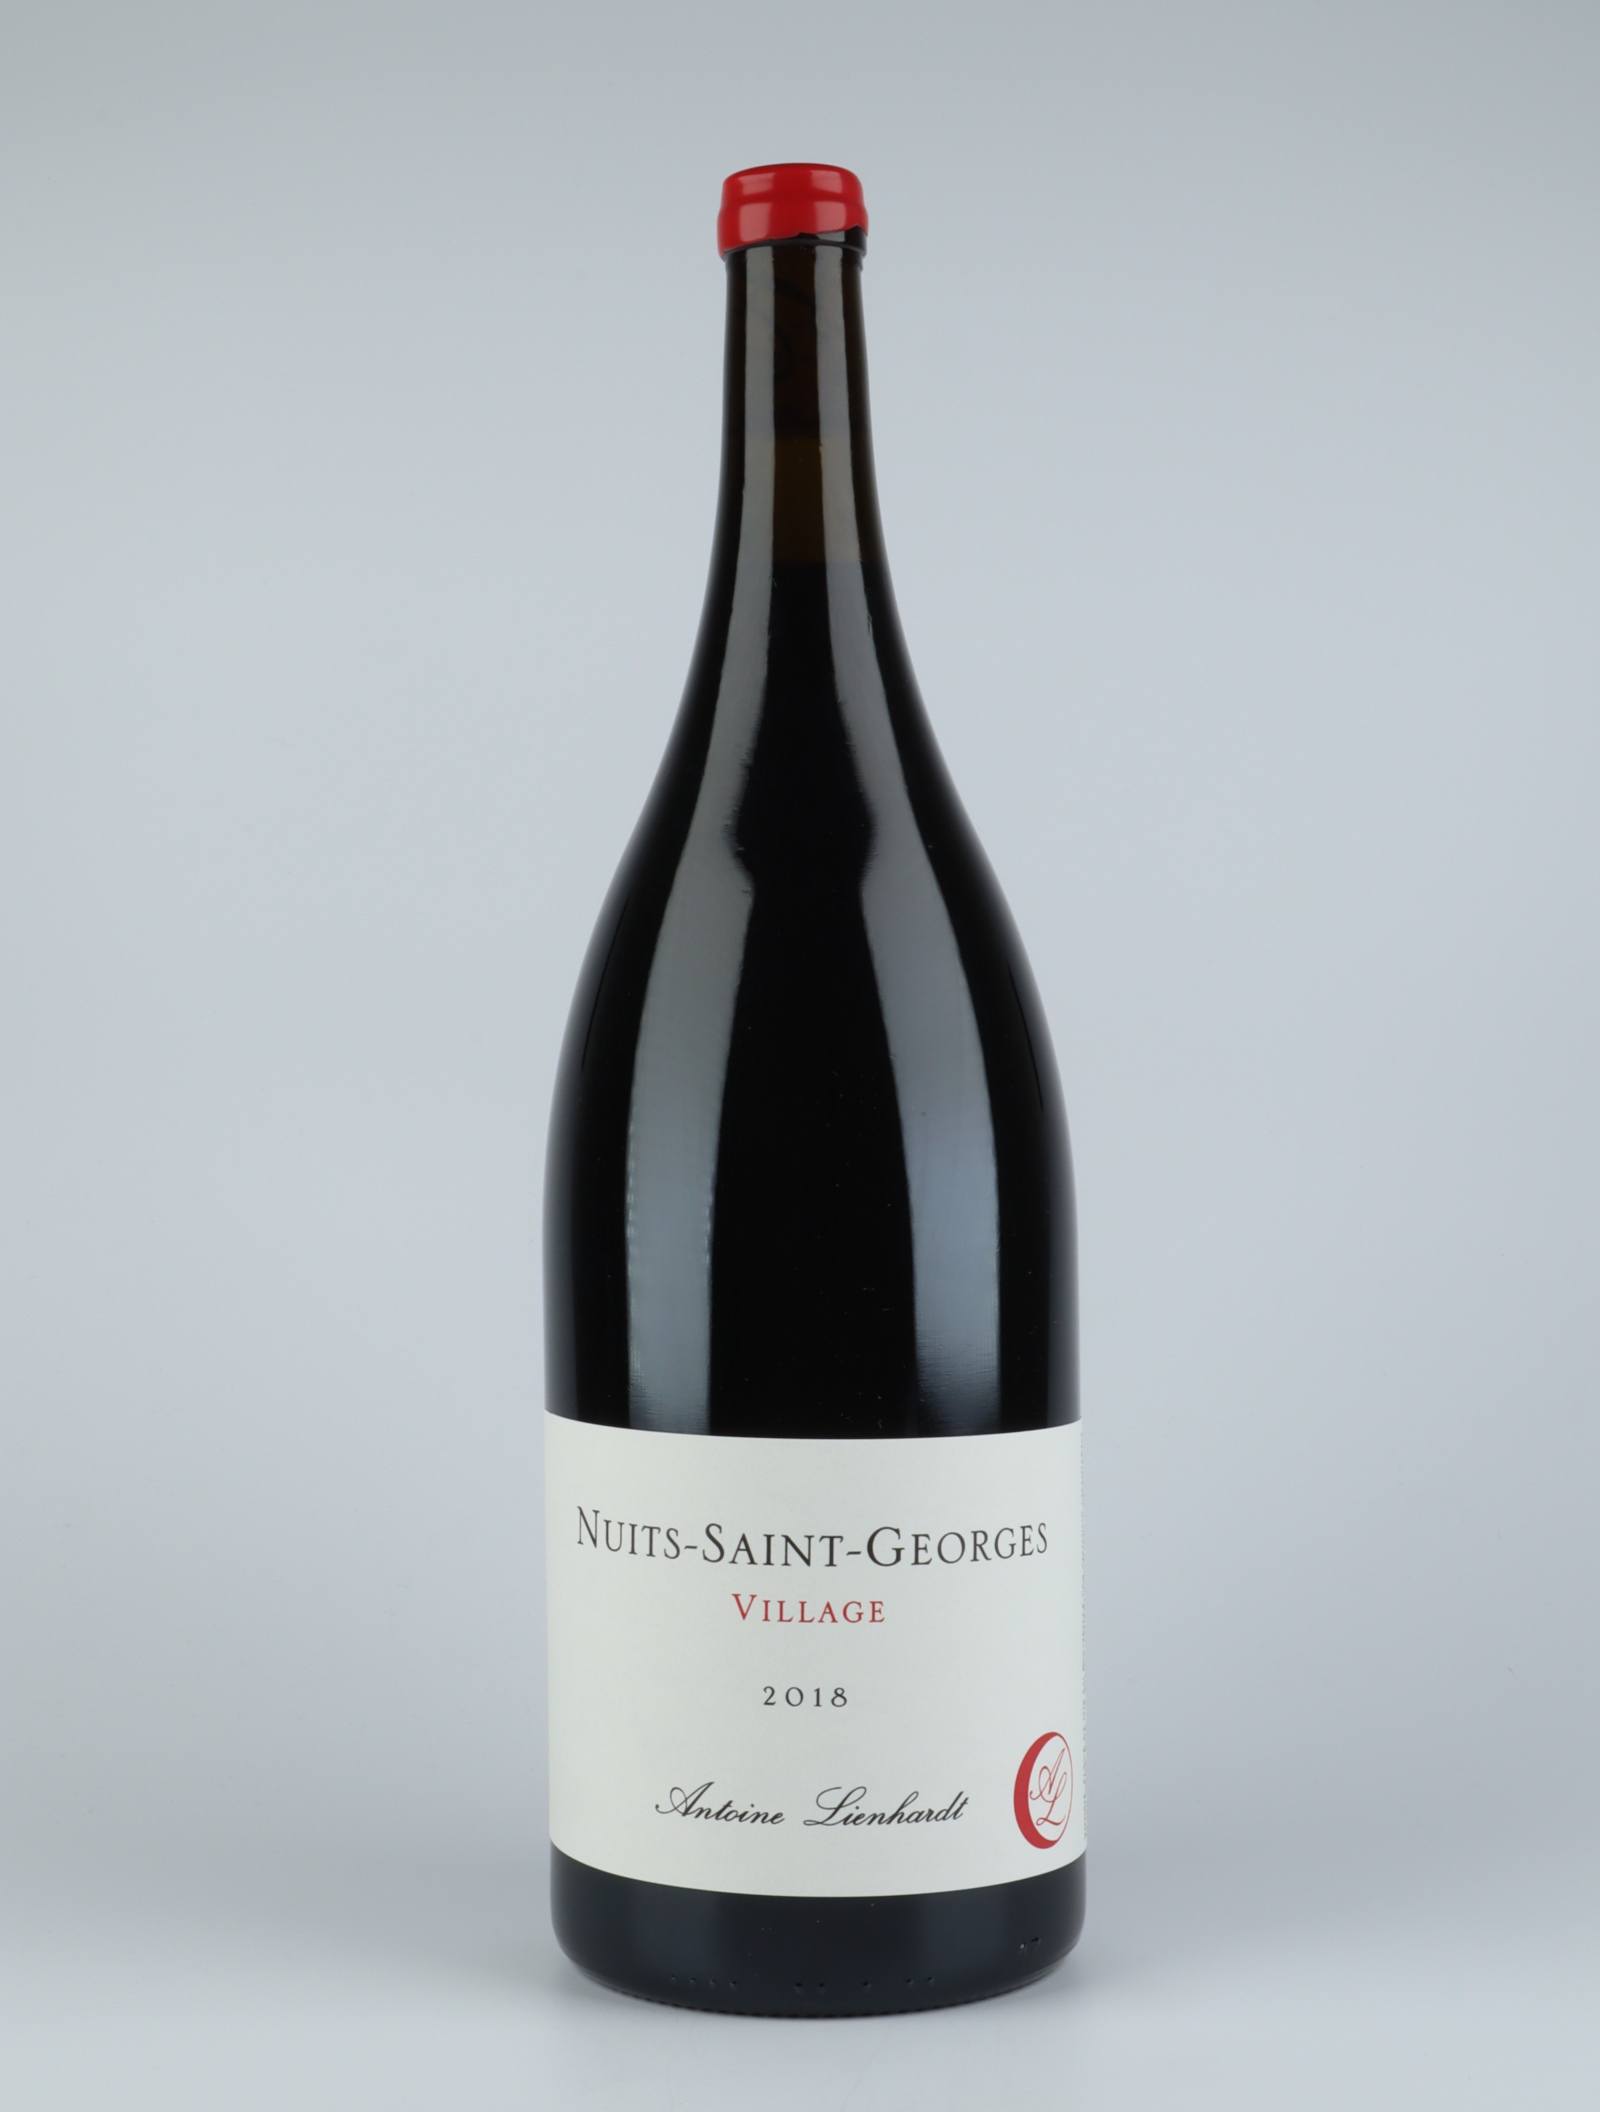 A bottle 2018 Nuits Saint Georges Red wine from Antoine Lienhardt, Burgundy in France